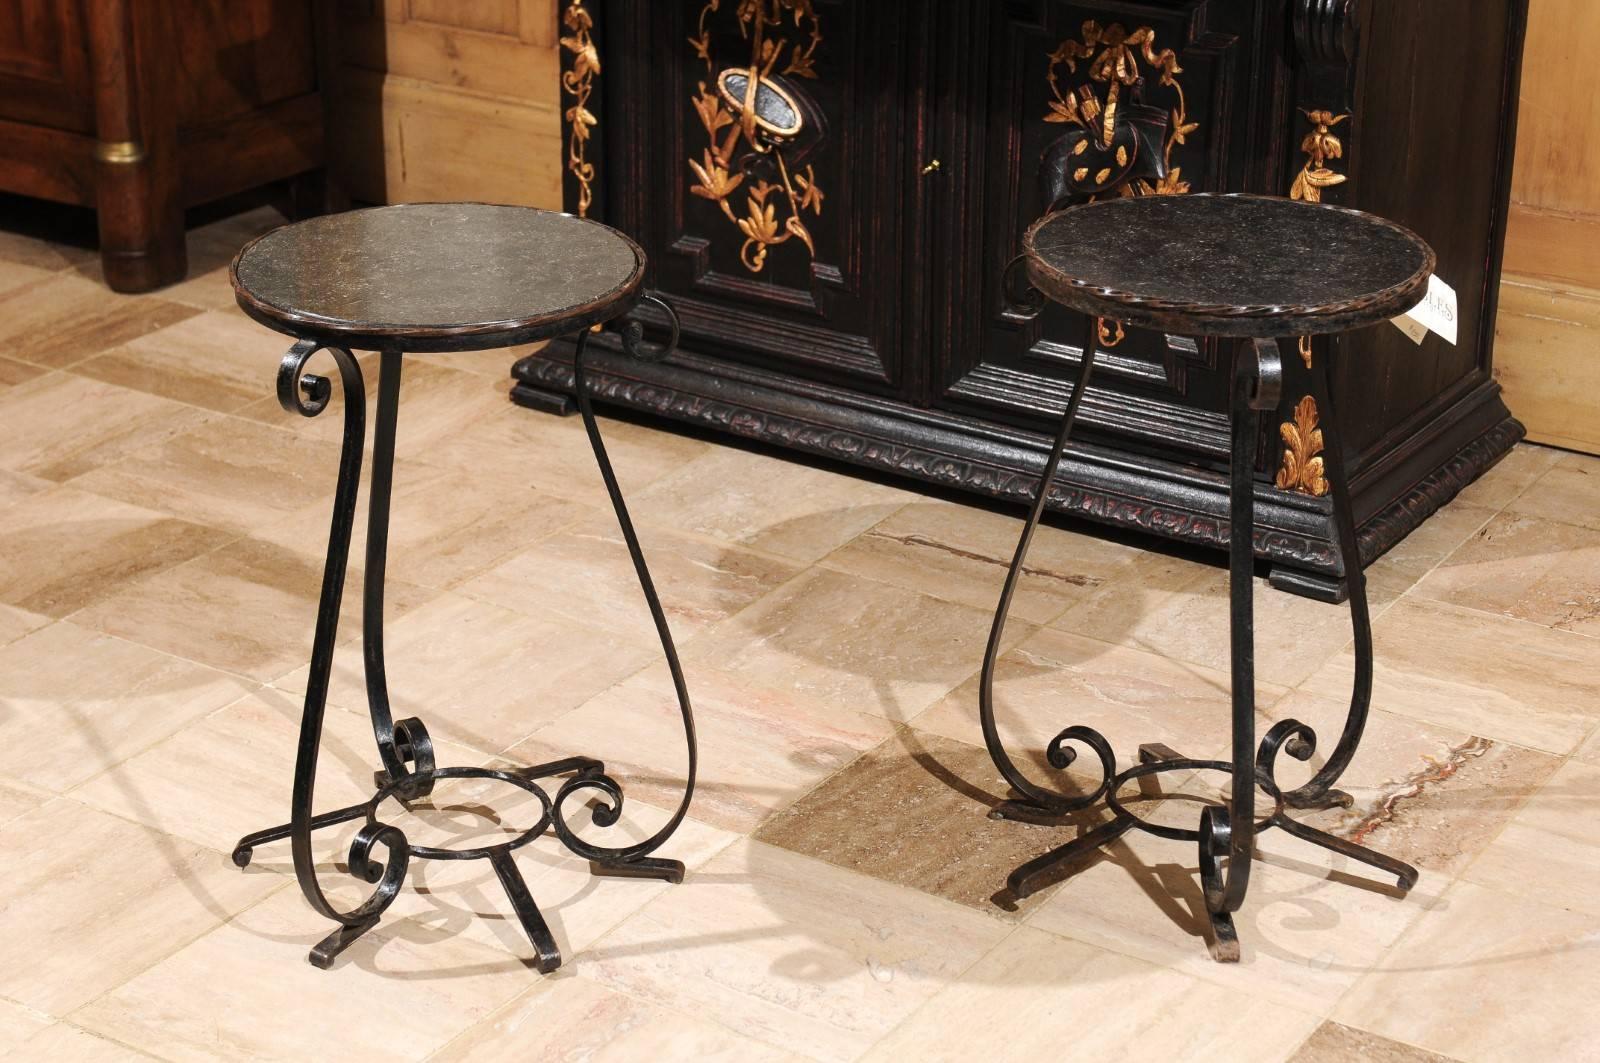 Pair of small vintage wrought iron tables with iron tops from France

This is a nice little pair of tables to use on a porch or in any other room to add a contrast in materials. They are a good size to keep by a chair but they would also work well